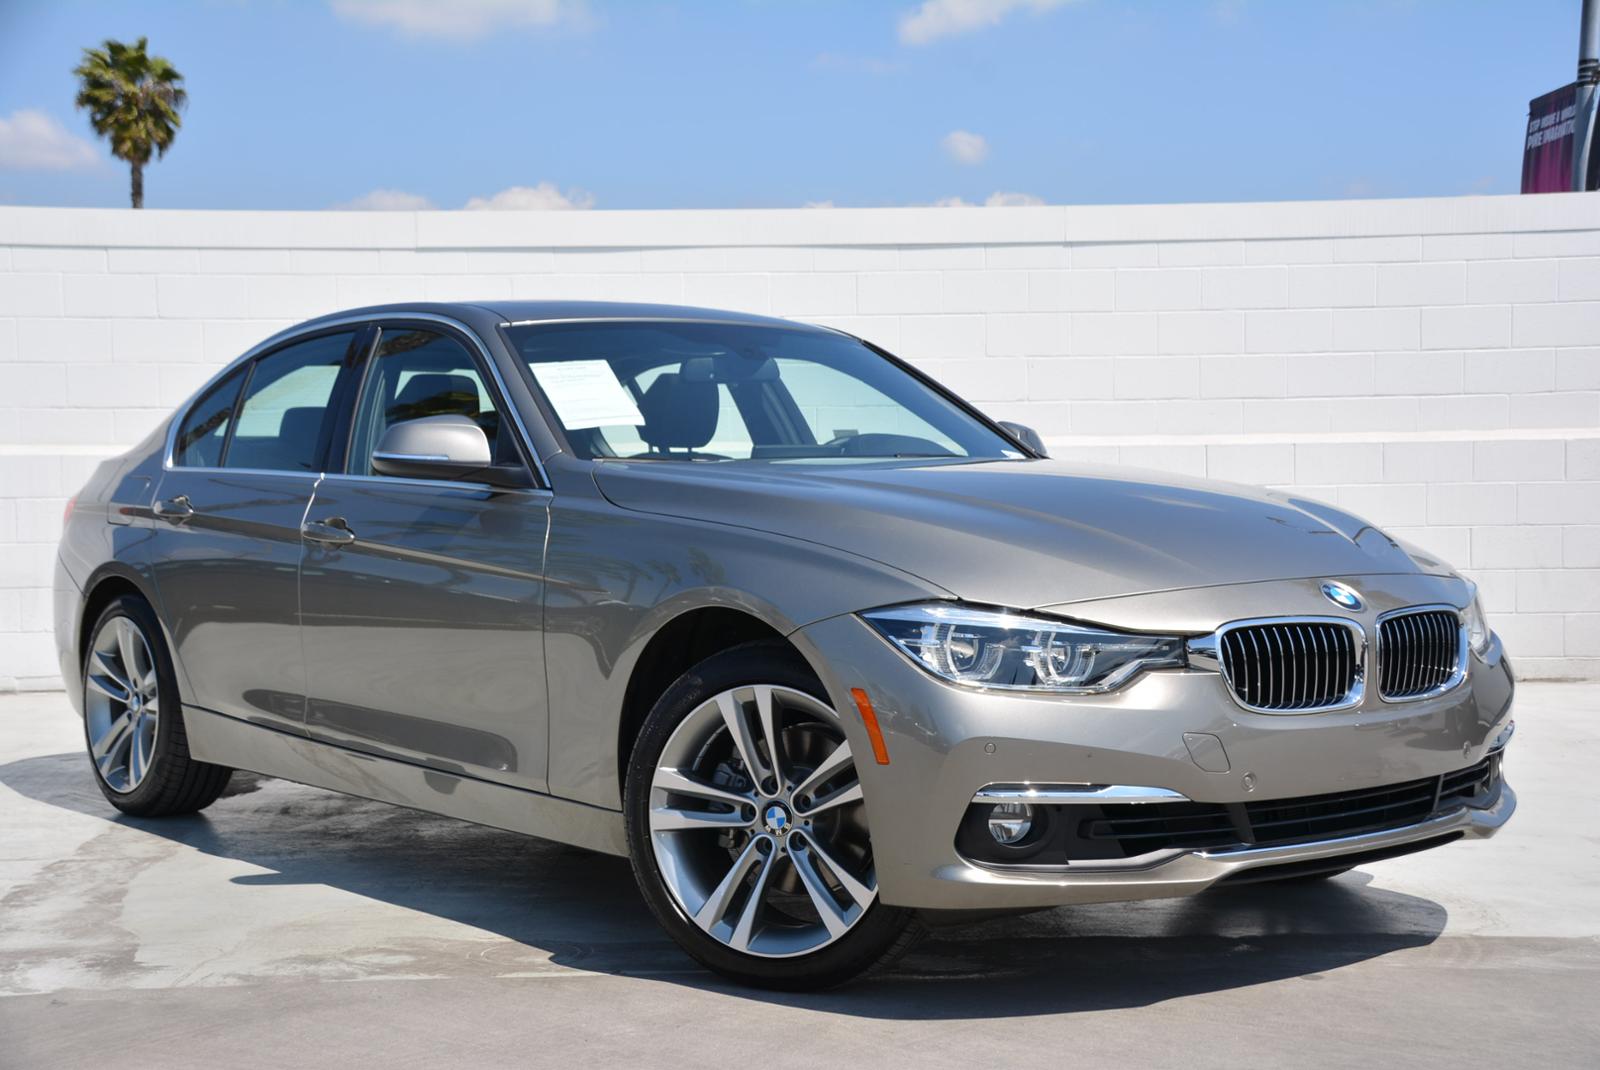 Pre-Owned 2018 BMW 3 Series 330i 330i Sedan in North Hollywood #P67445